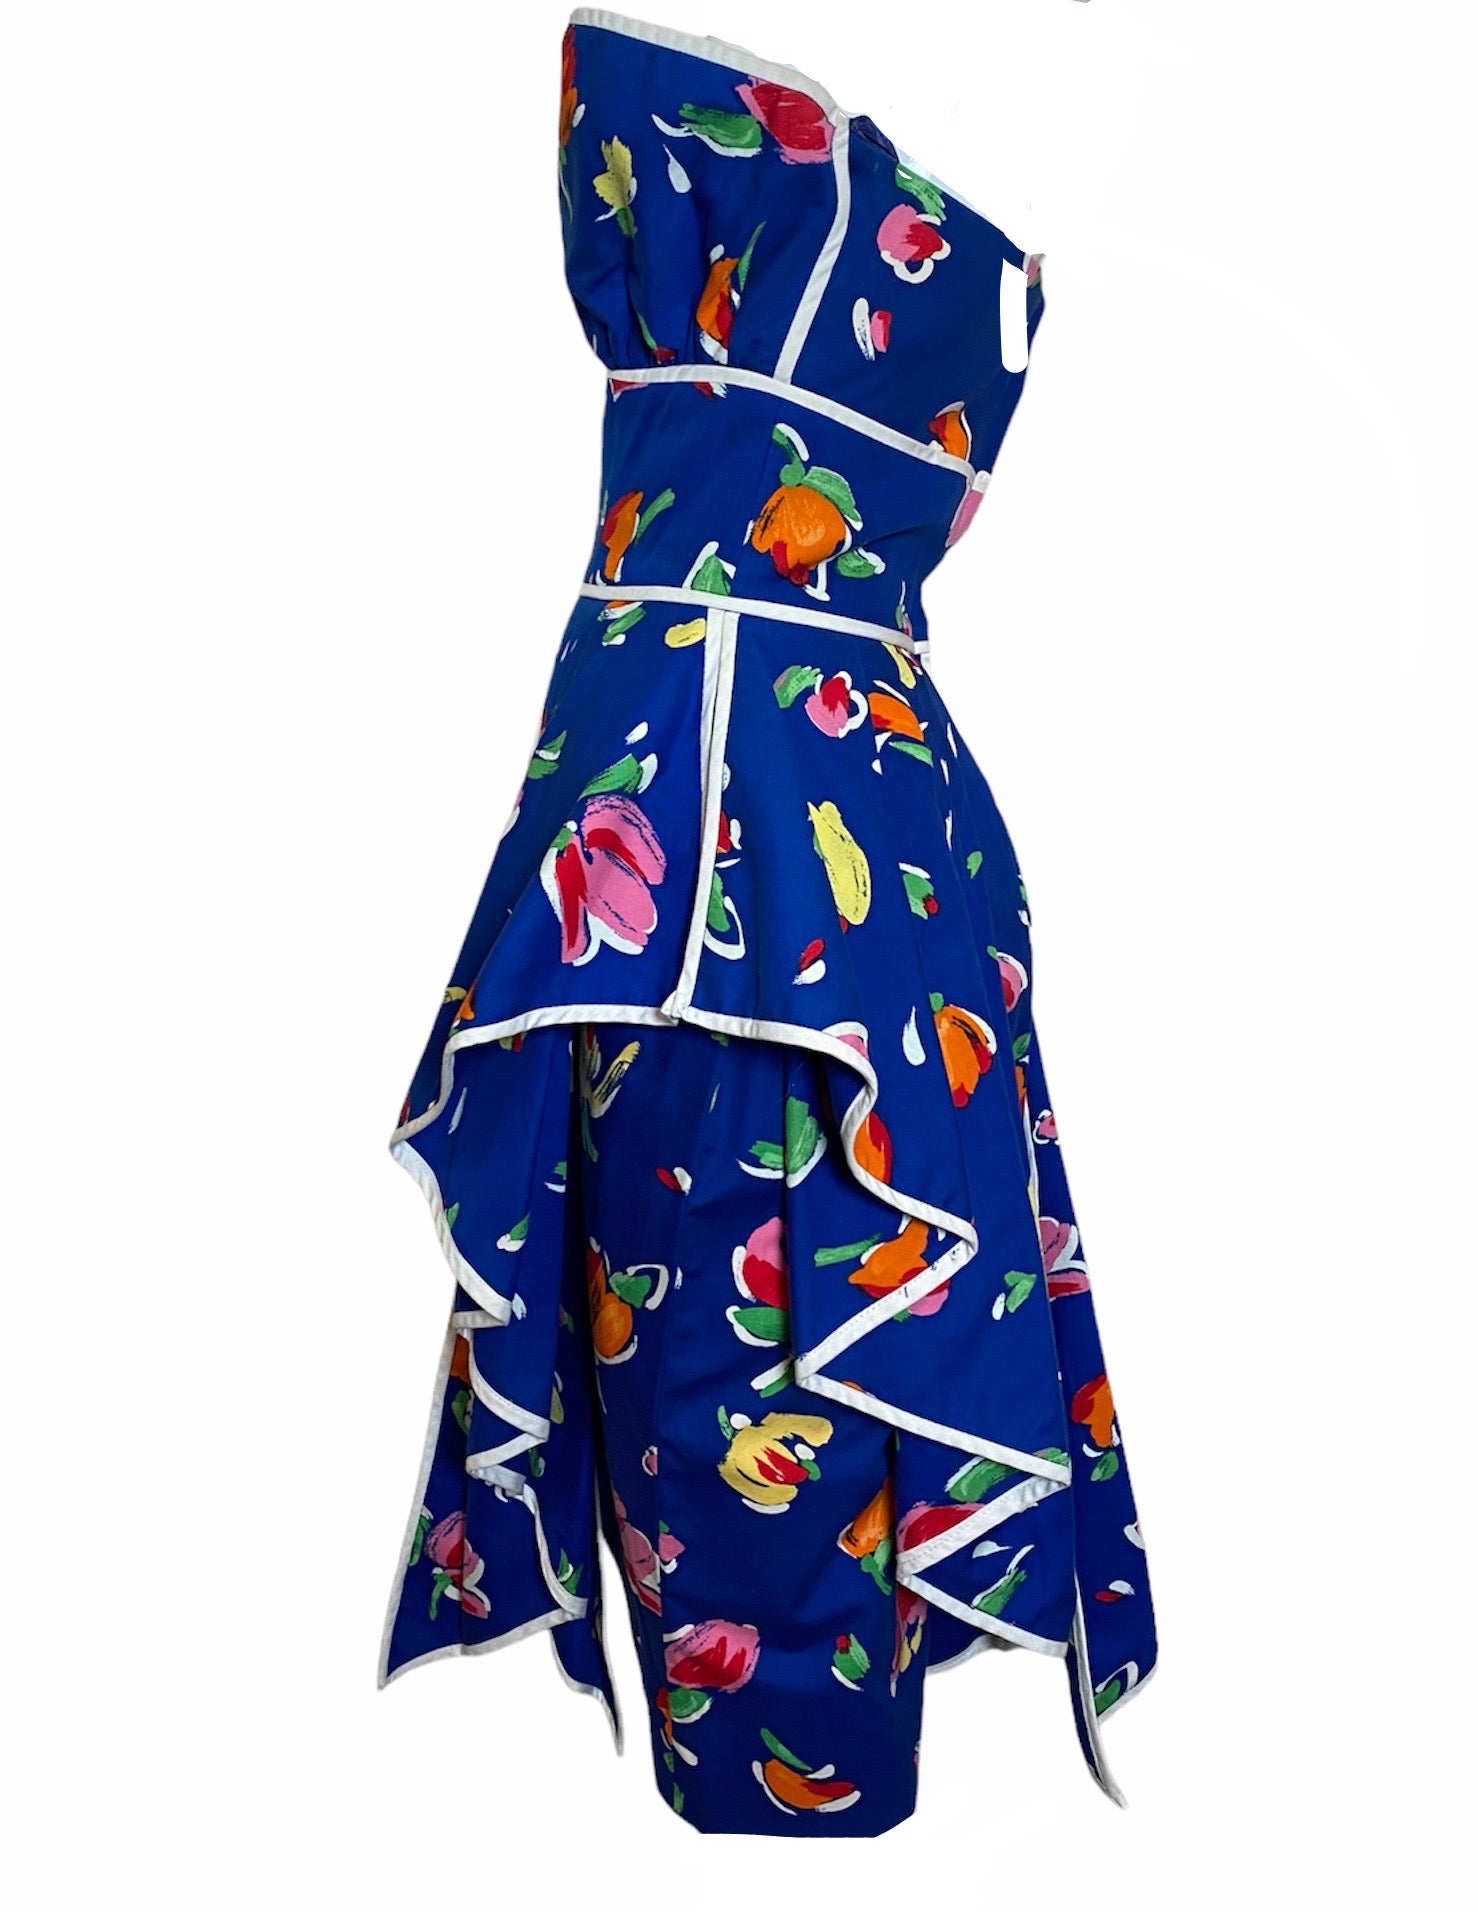 Sideview of Victor Costa DressVictor Costa 80s Blue Strapless Floral Summer Dress SIDE 2 of 4